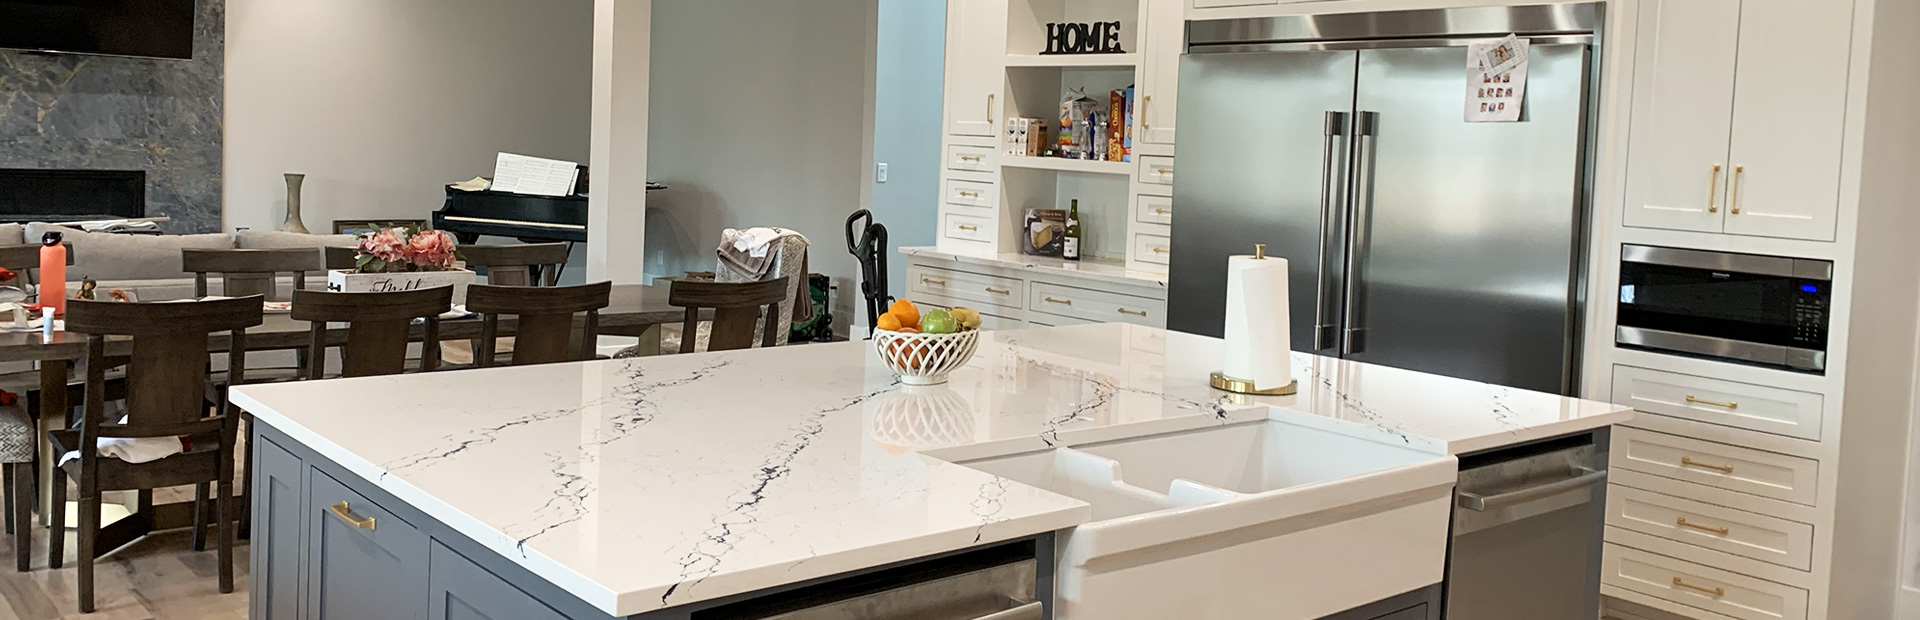 Kitchen Remodeling Experts - Dallas